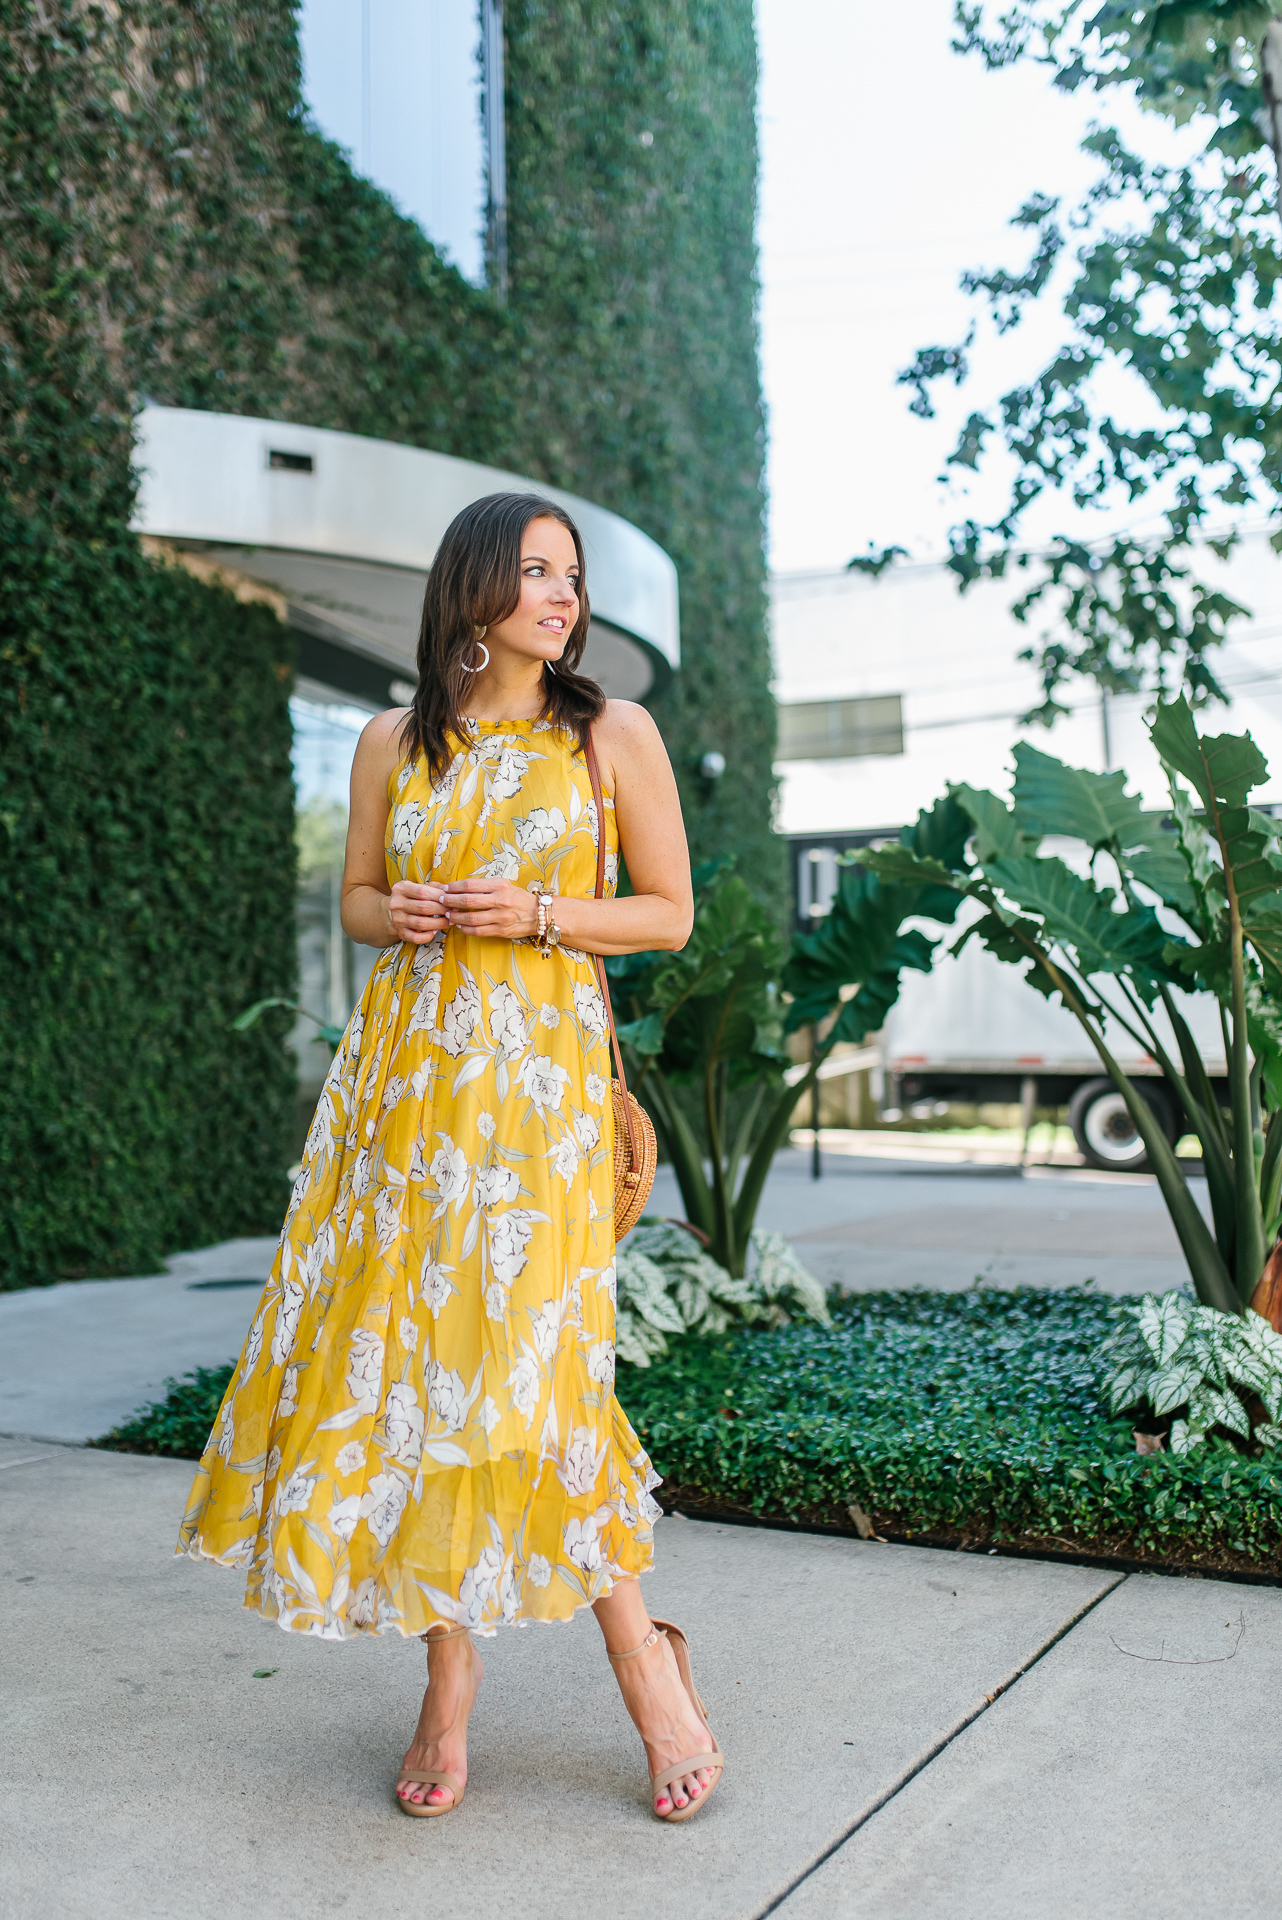 http://ladyinviolet.com/wp-content/uploads/2019/06/a-summer-outfit-yellow-floral-dress-nude-colored-sandals.jpg